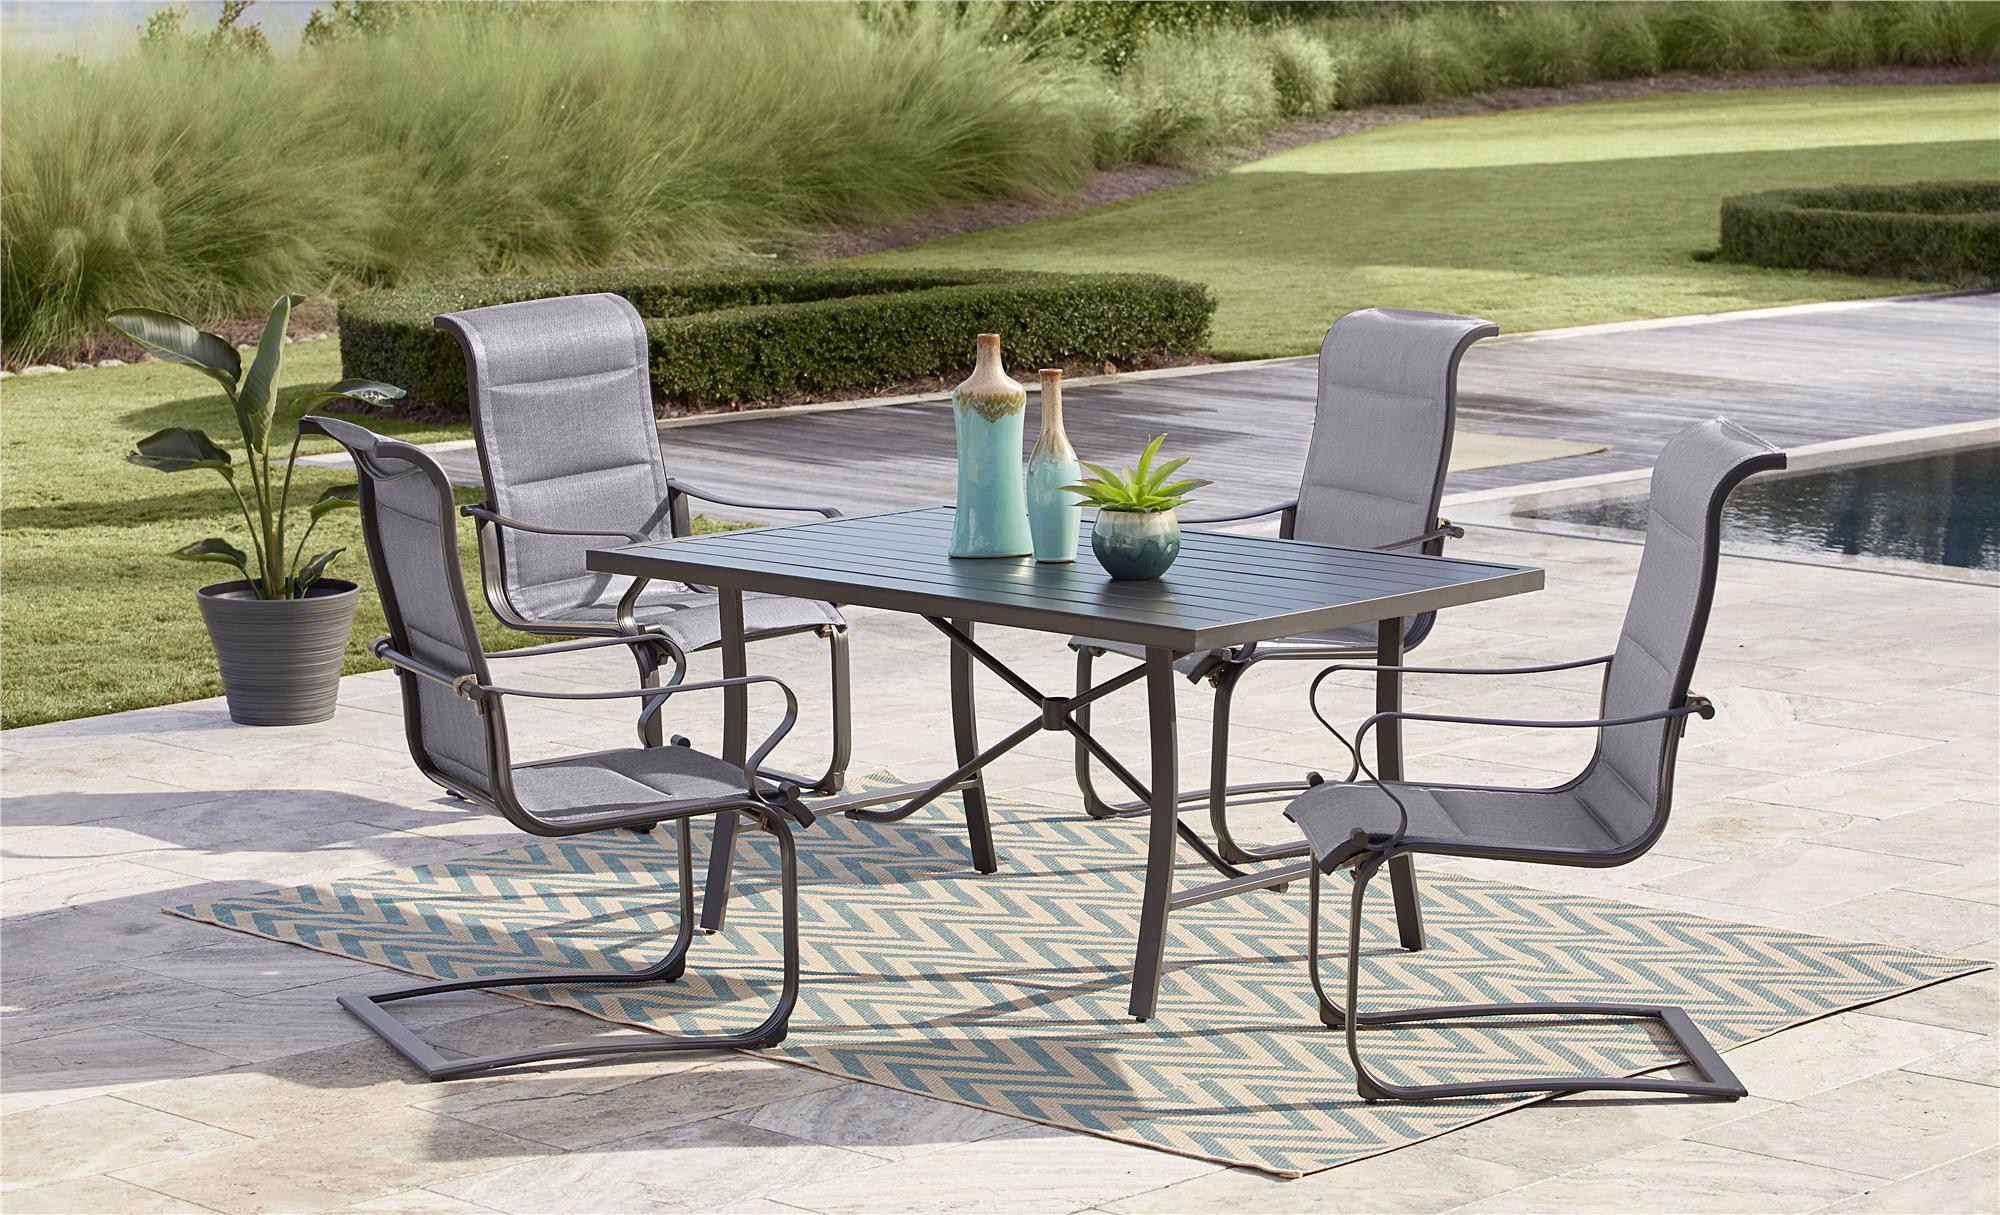 COSCO Outdoor Living 5 Piece SmartConnect Dining Set with Padded Motion Chairs, Gray Frame, Gray Fabric - image 1 of 23